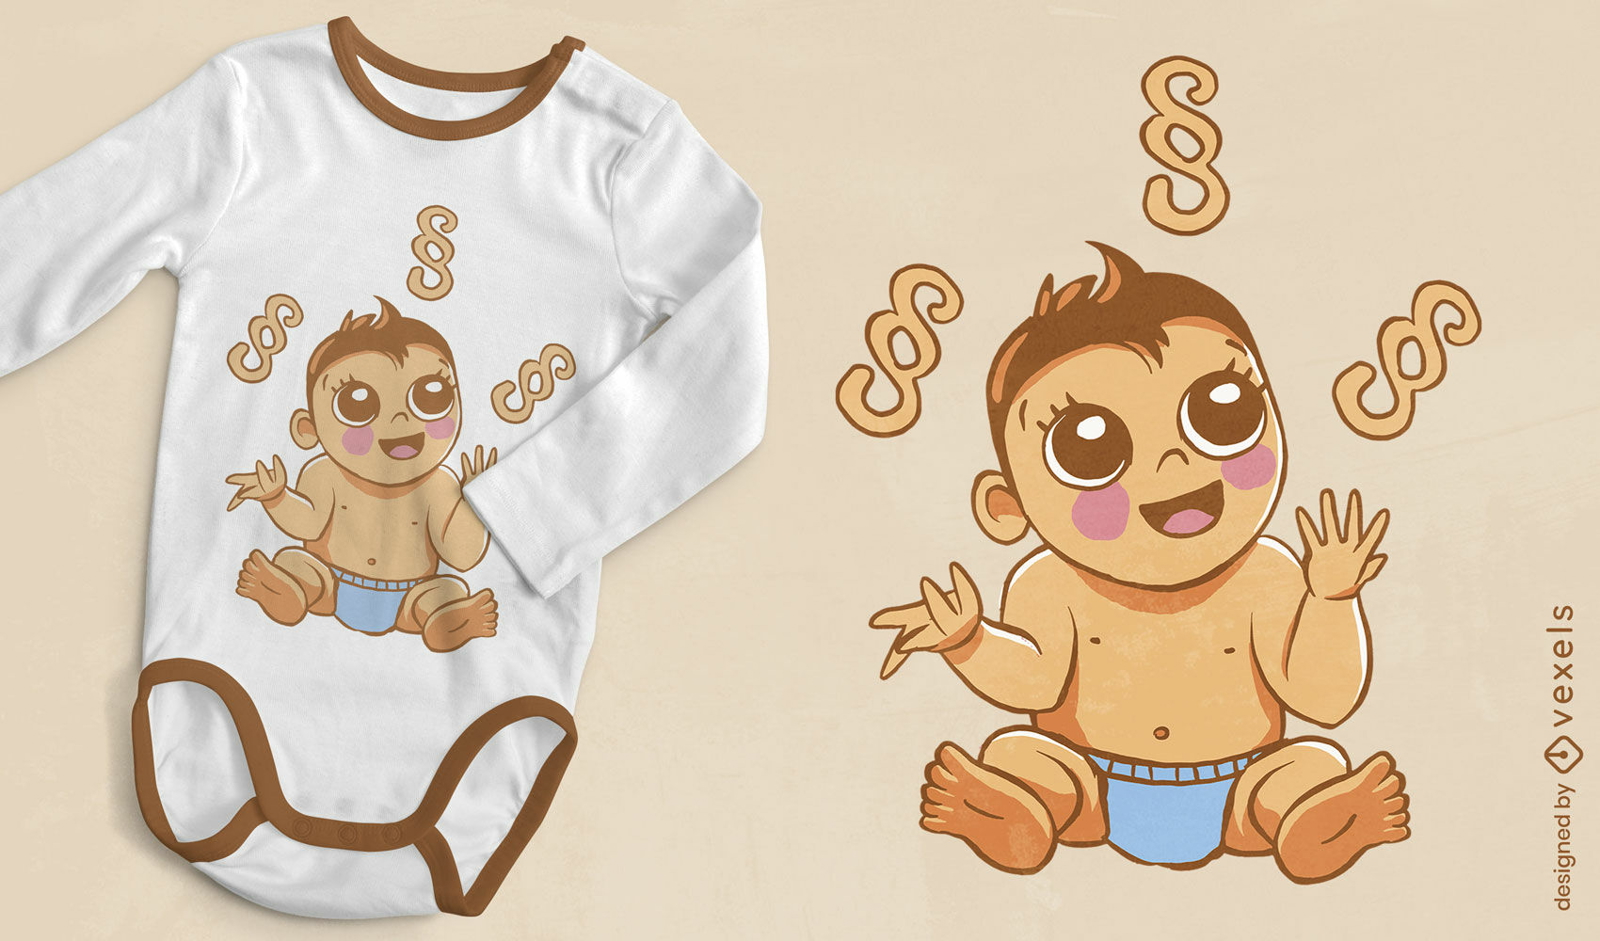 Baby boy juggling with paragraph signs t-shirt design